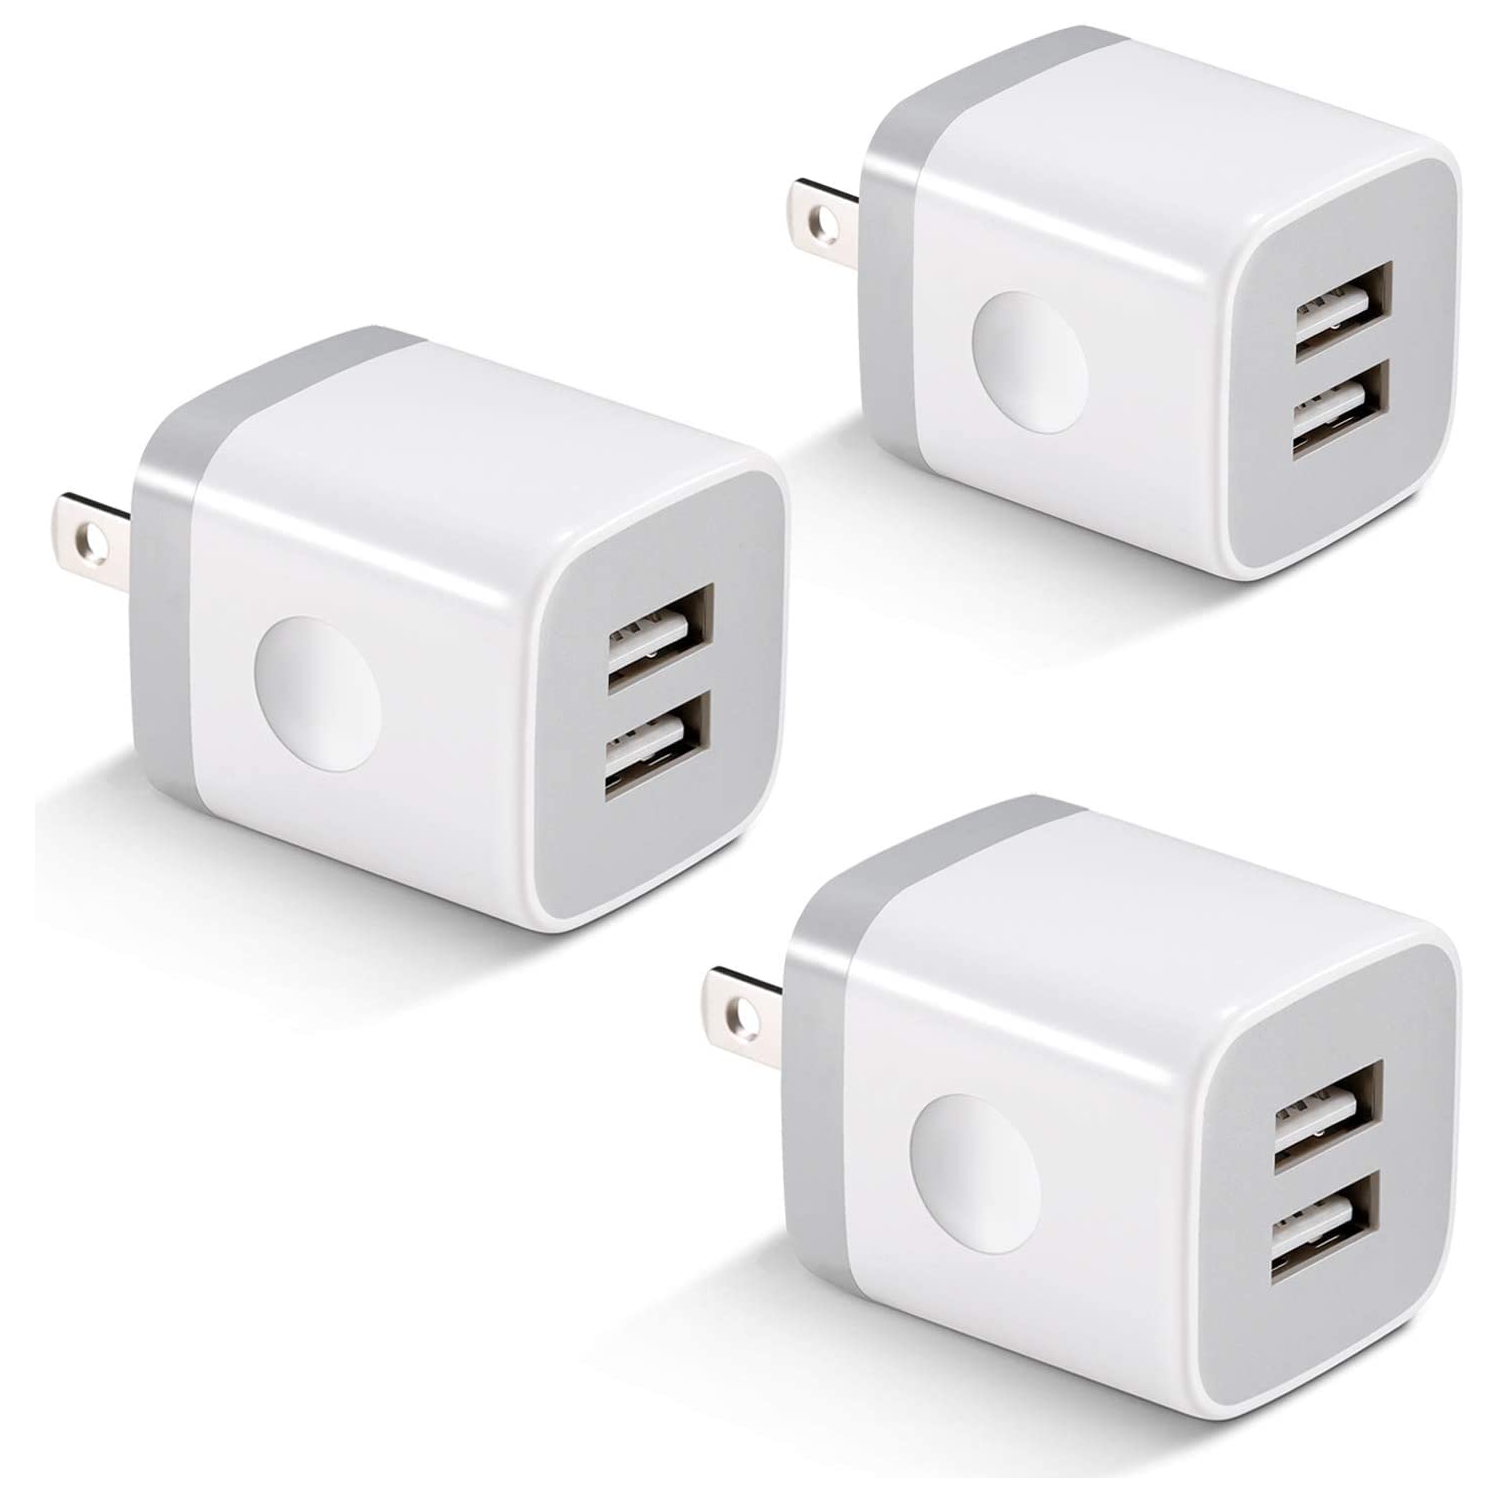 USB Charger, 3-Pack 2.1A/5V Dual Port USB Wall Plug Power Adapter Charging Cube Brick Box Charger Block for iPhone 13/Pro Max/12/11 XR/XS/X/8/7/6 Plus/SE/5S, iPad, Samsung, Moto,